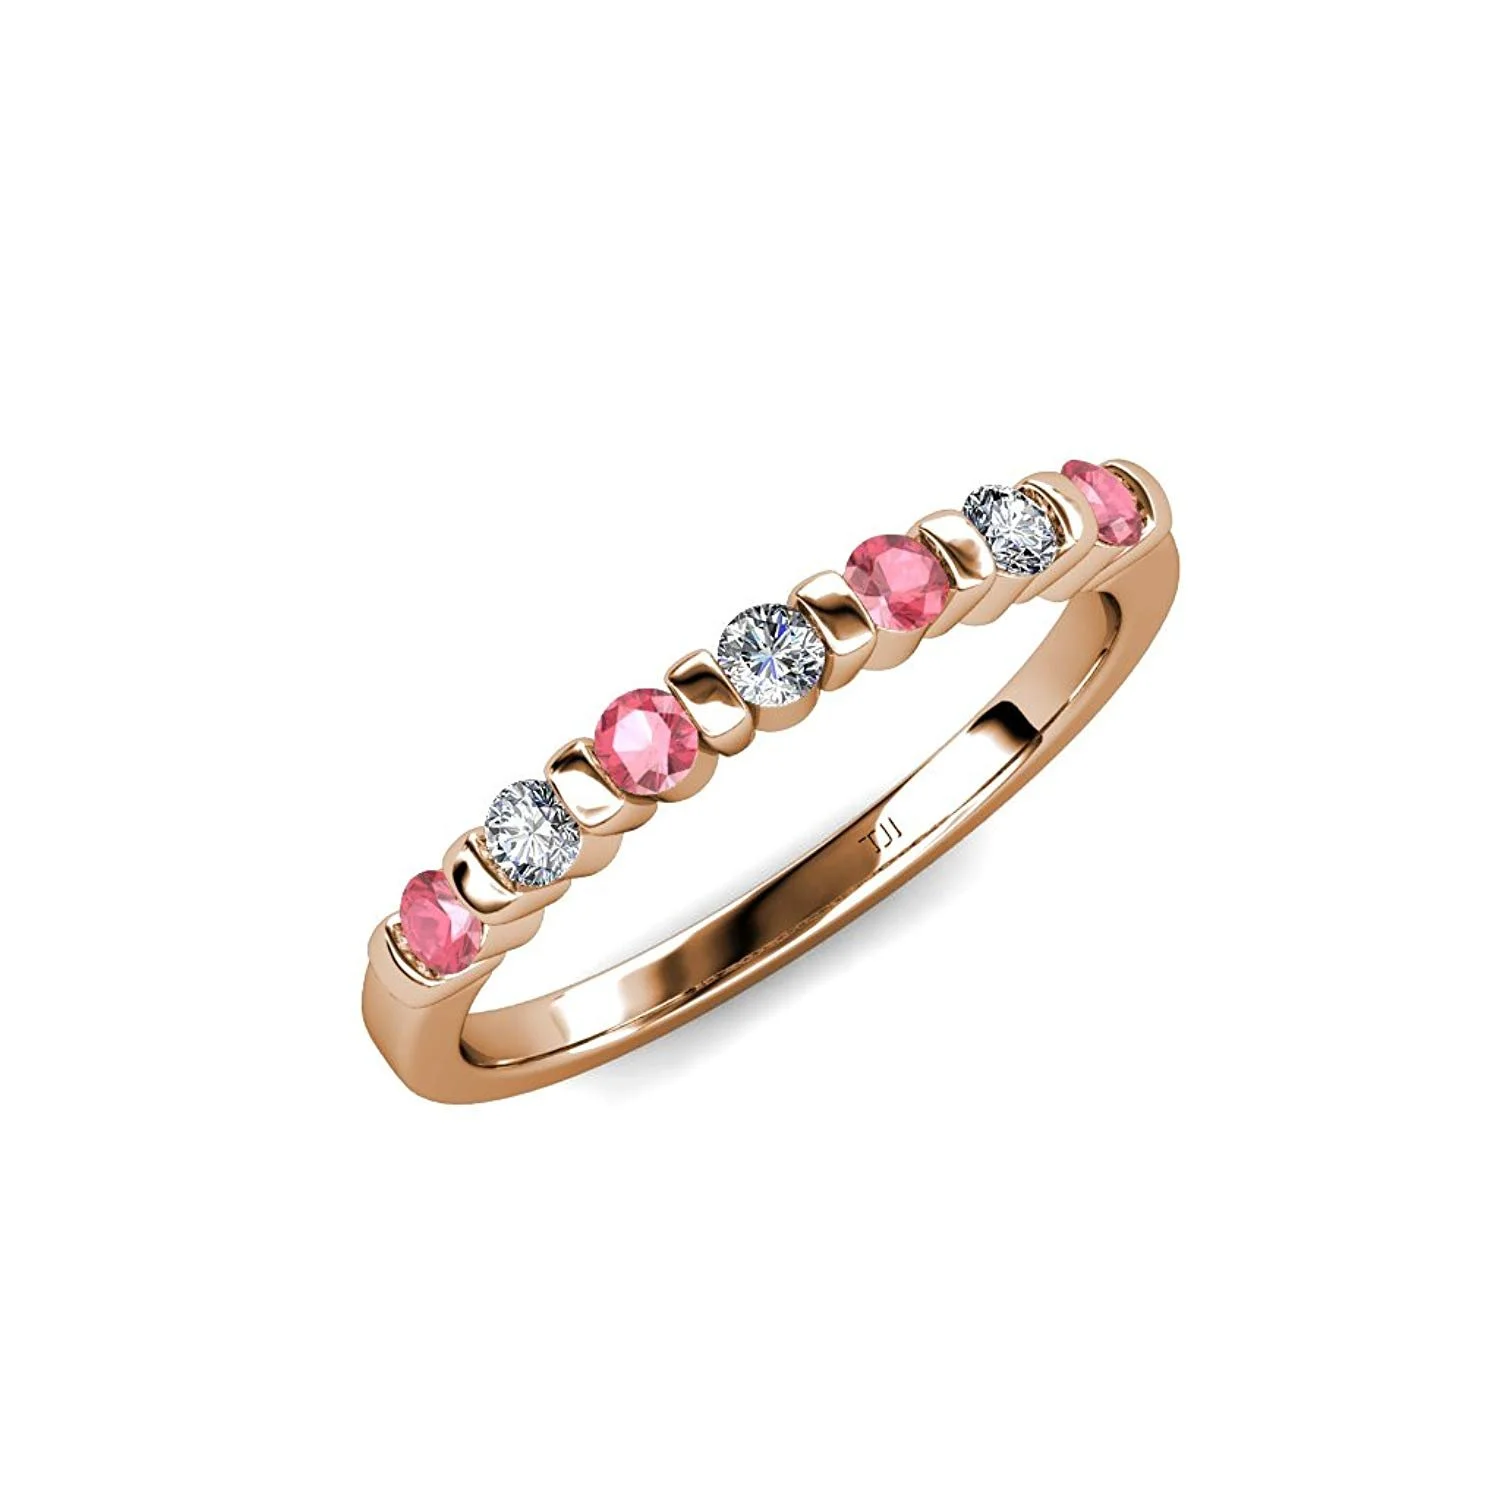 Pink Tourmaline and Diamond 7 Stone Wedding Band 0.22 ct tw in 14K Rose Gold.size 4.5